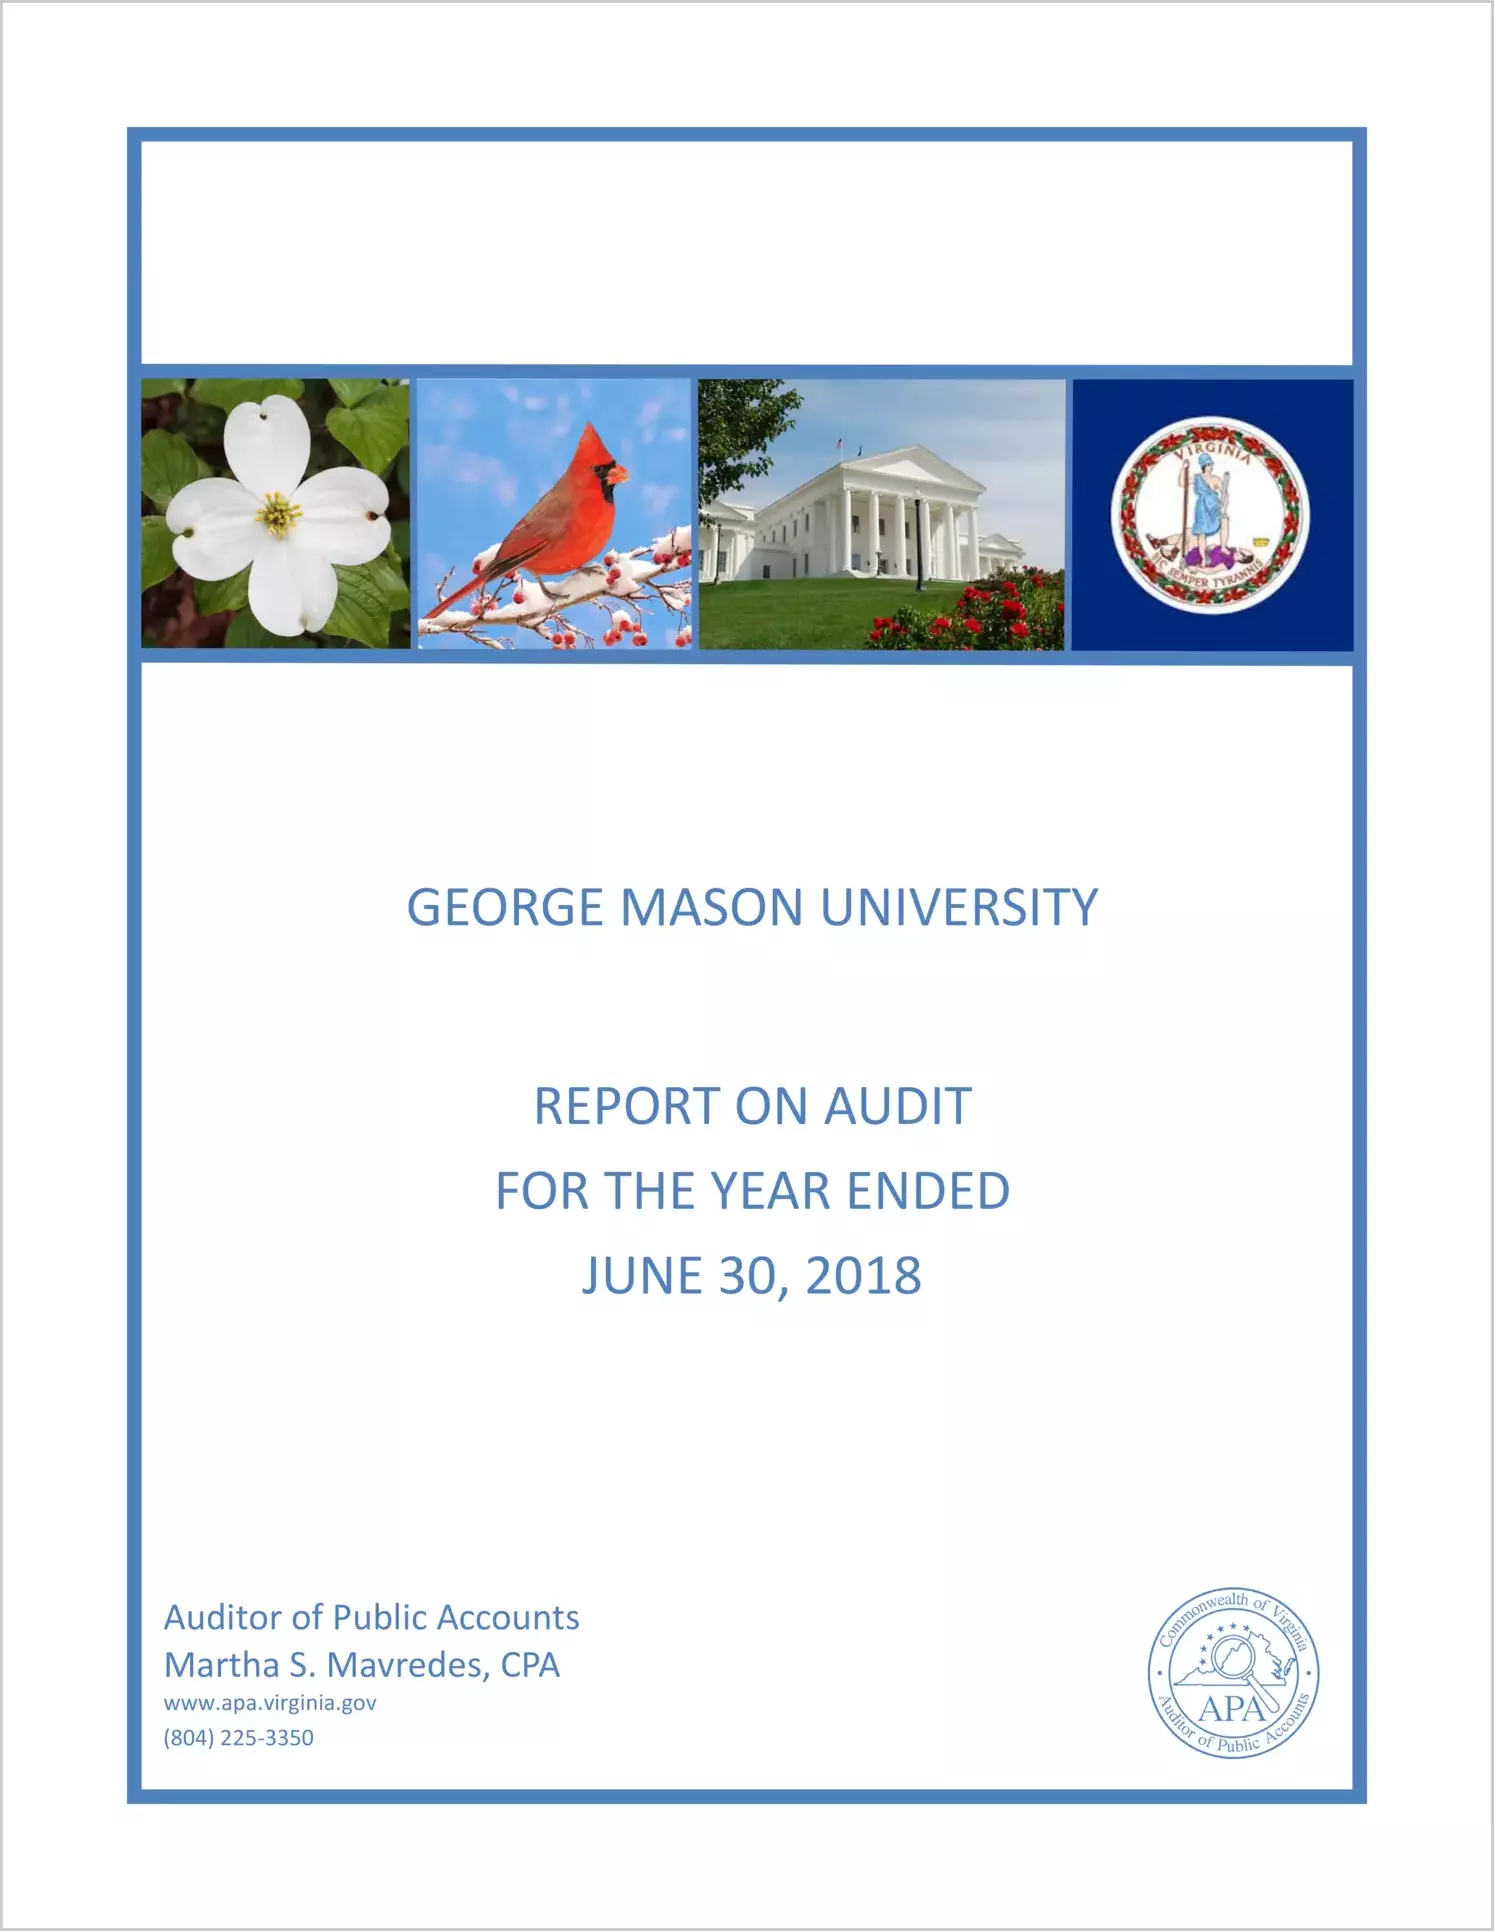 George Mason University for the year ended June 30, 2018